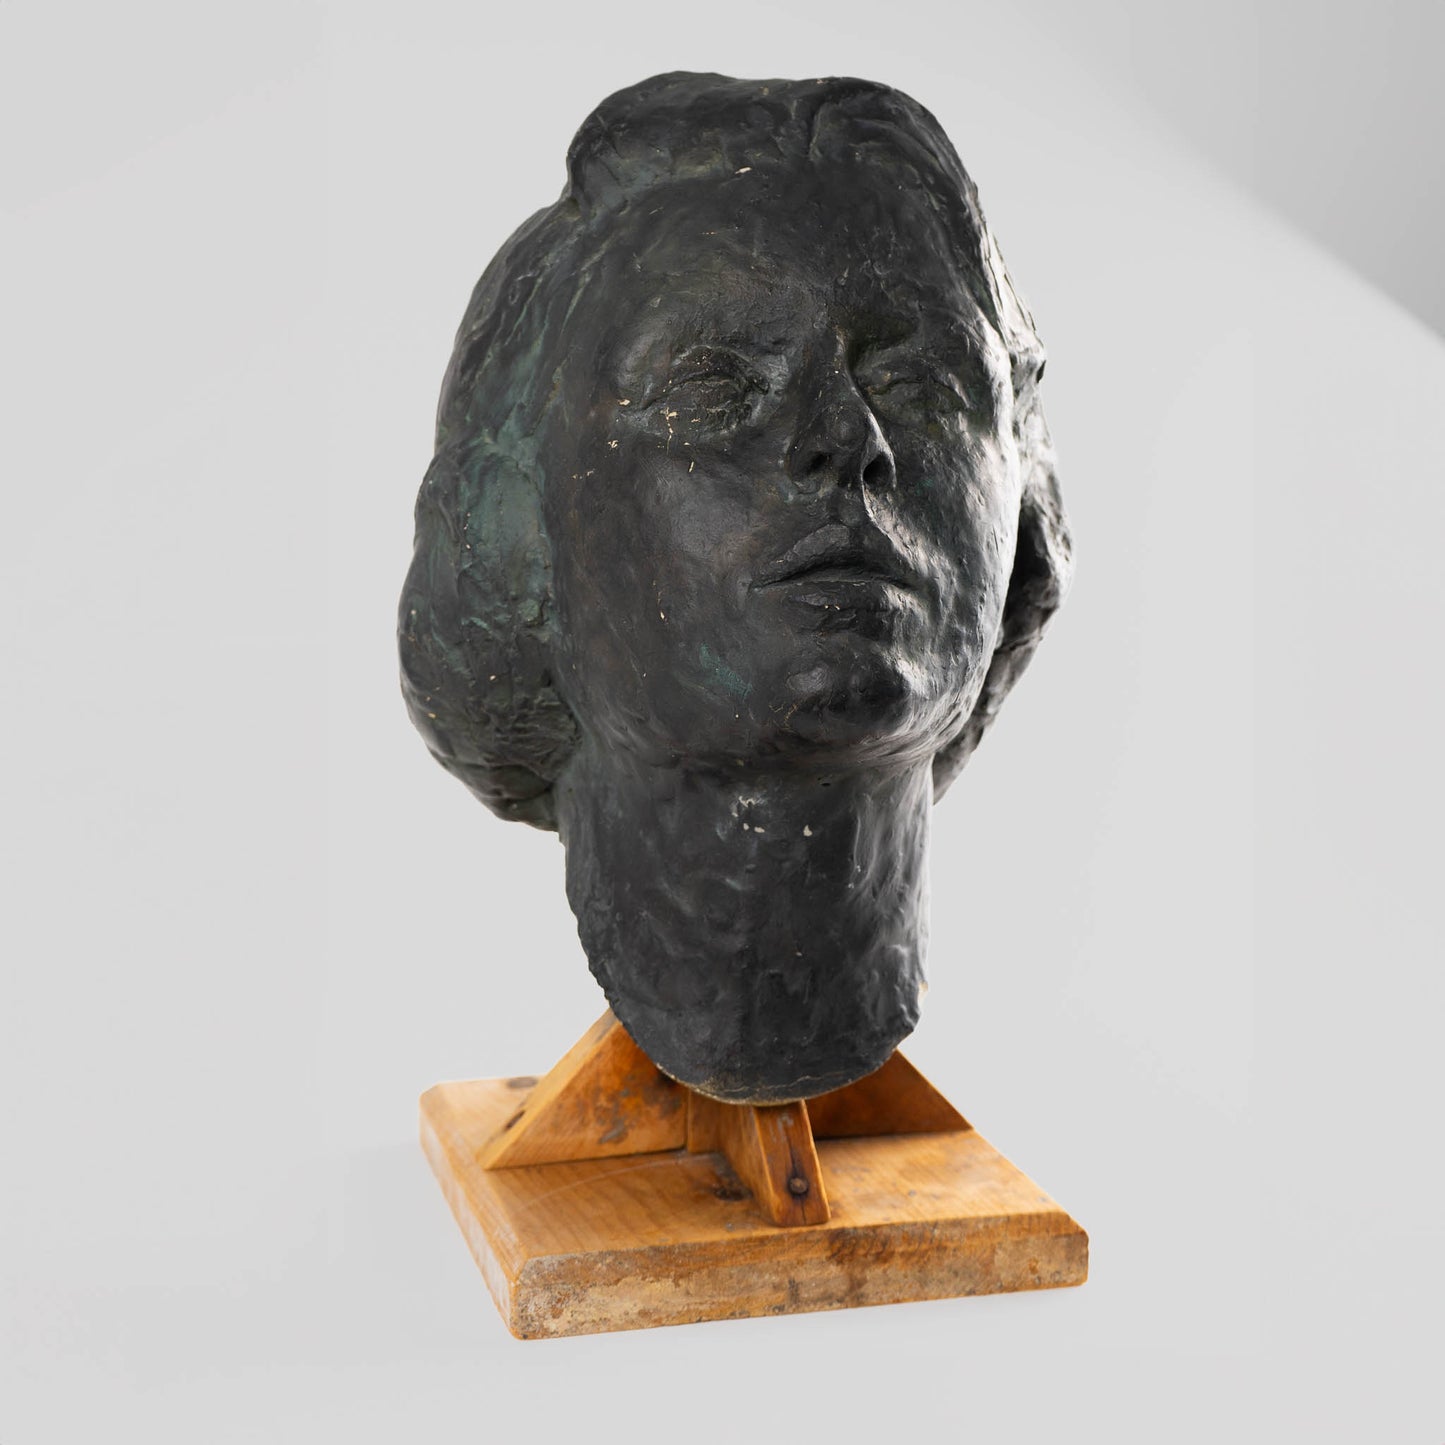 Figurative Plaster Woman's Face Sculpture on Rustic Wood Stand